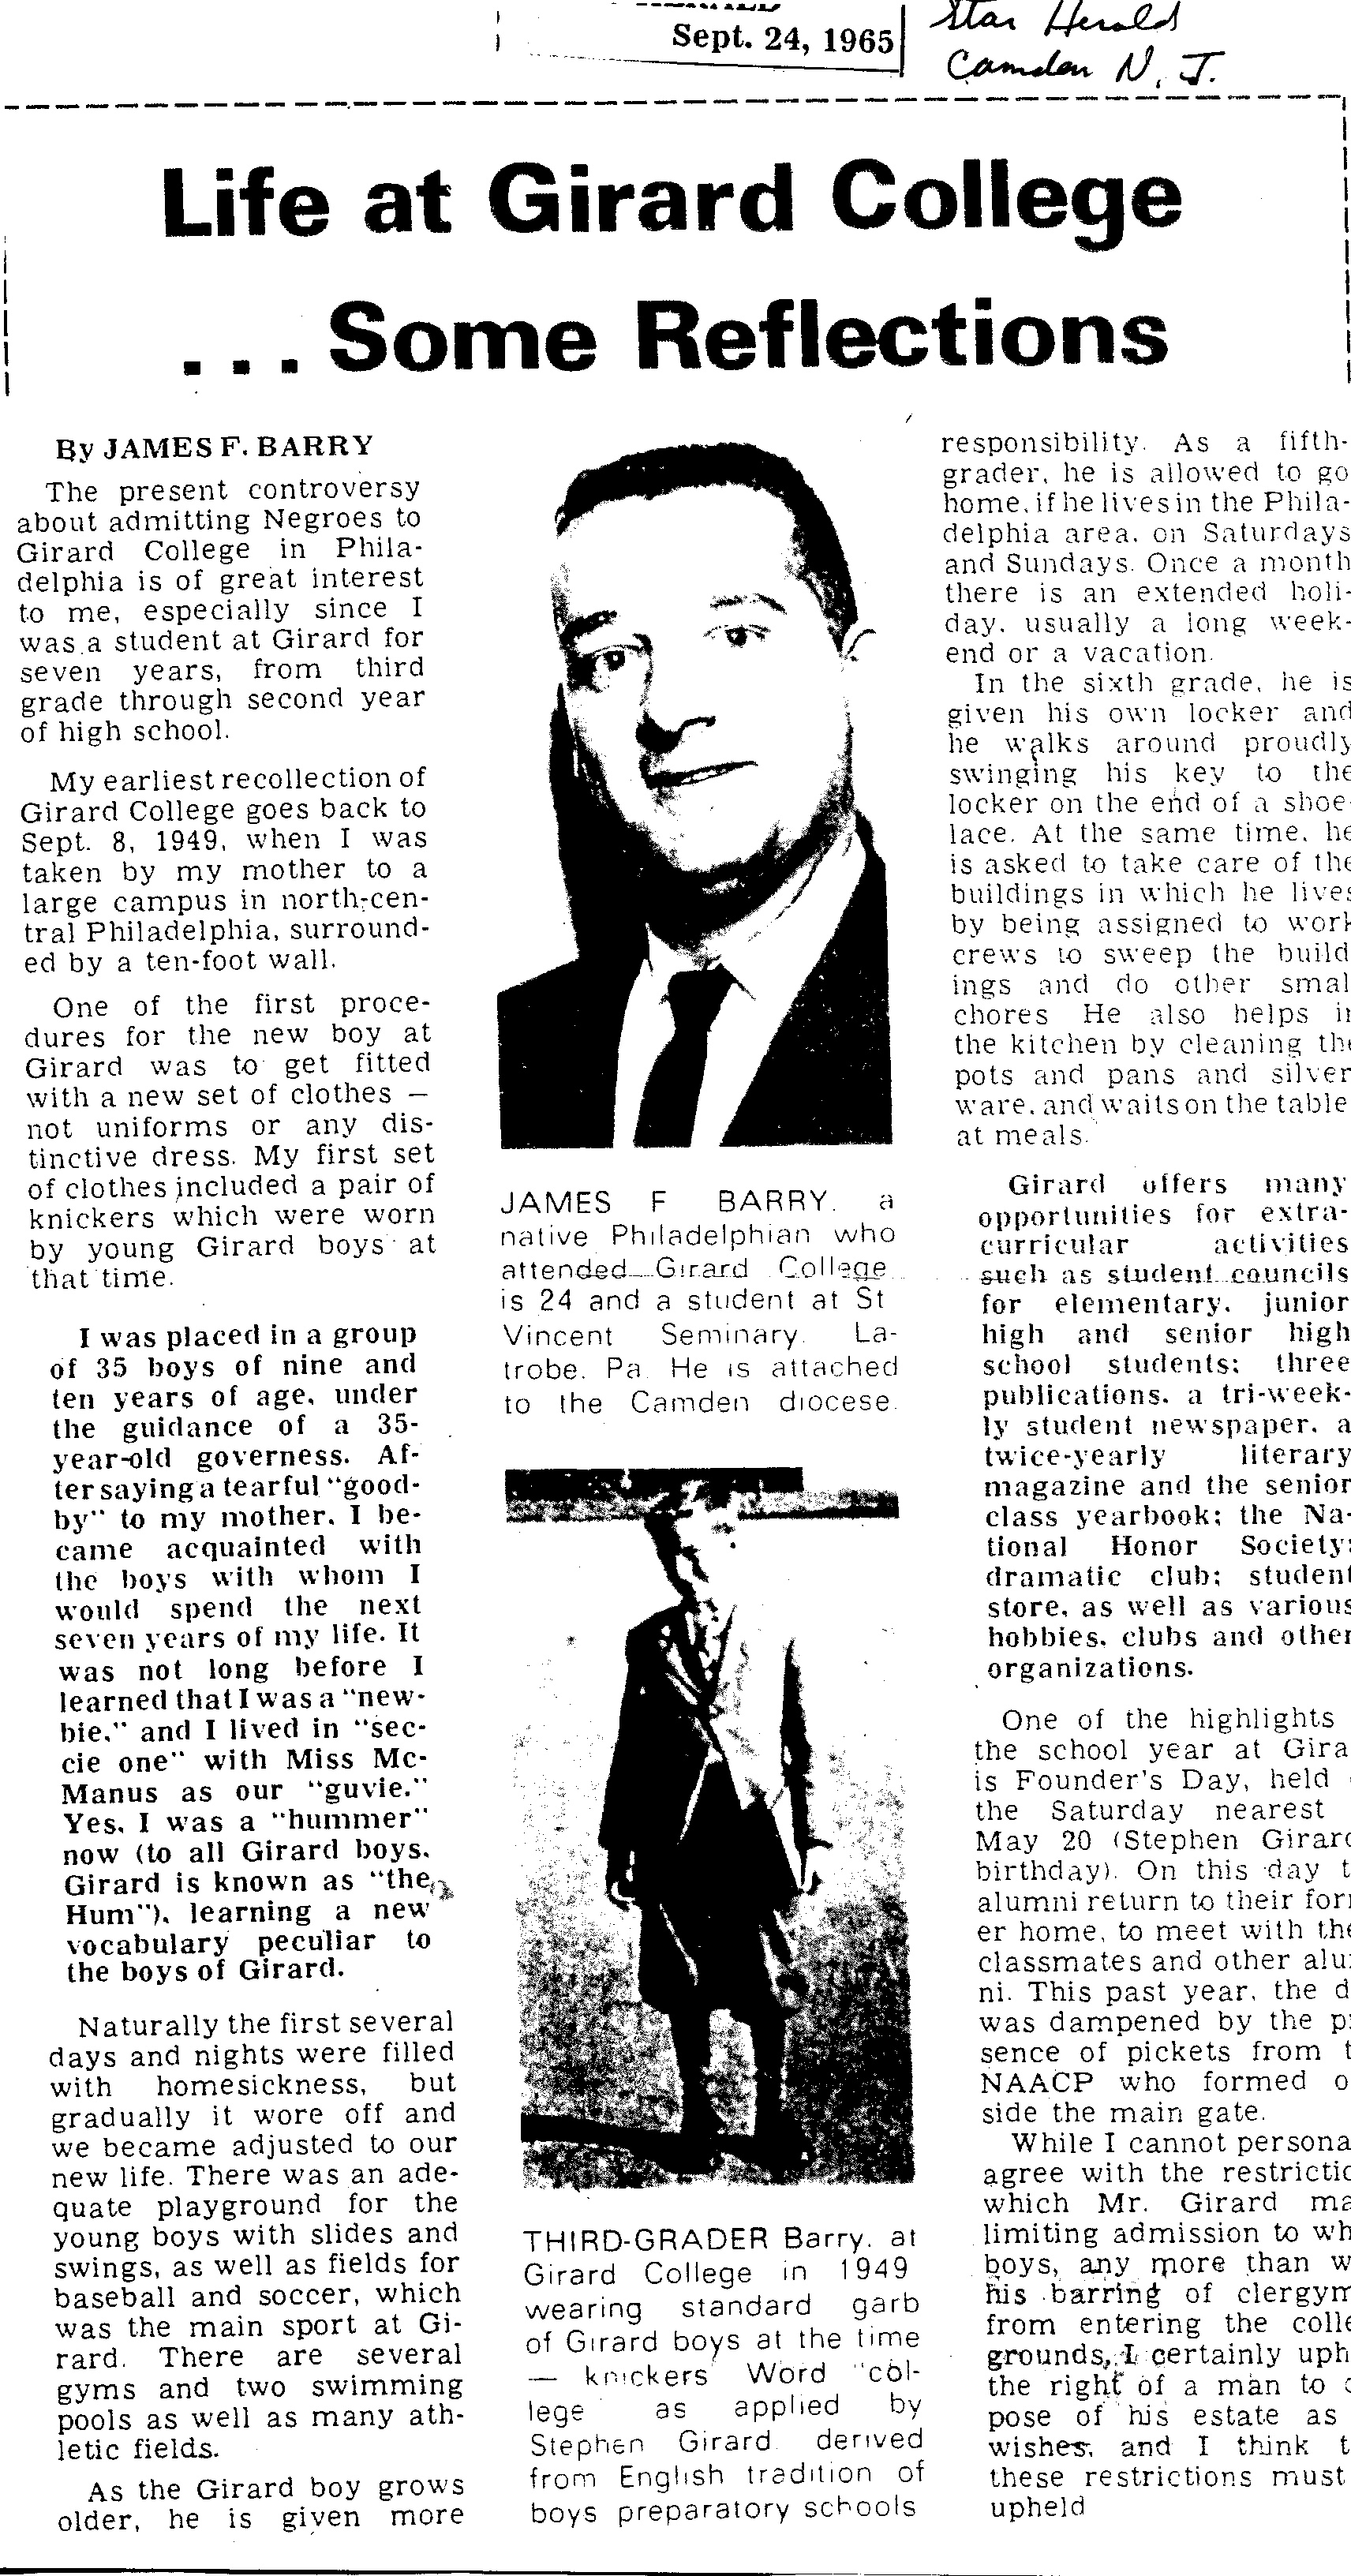 Jim Barry's reflection on life at girard. - From the Star Herald, Camden, N.J. 4 Sept. 1965